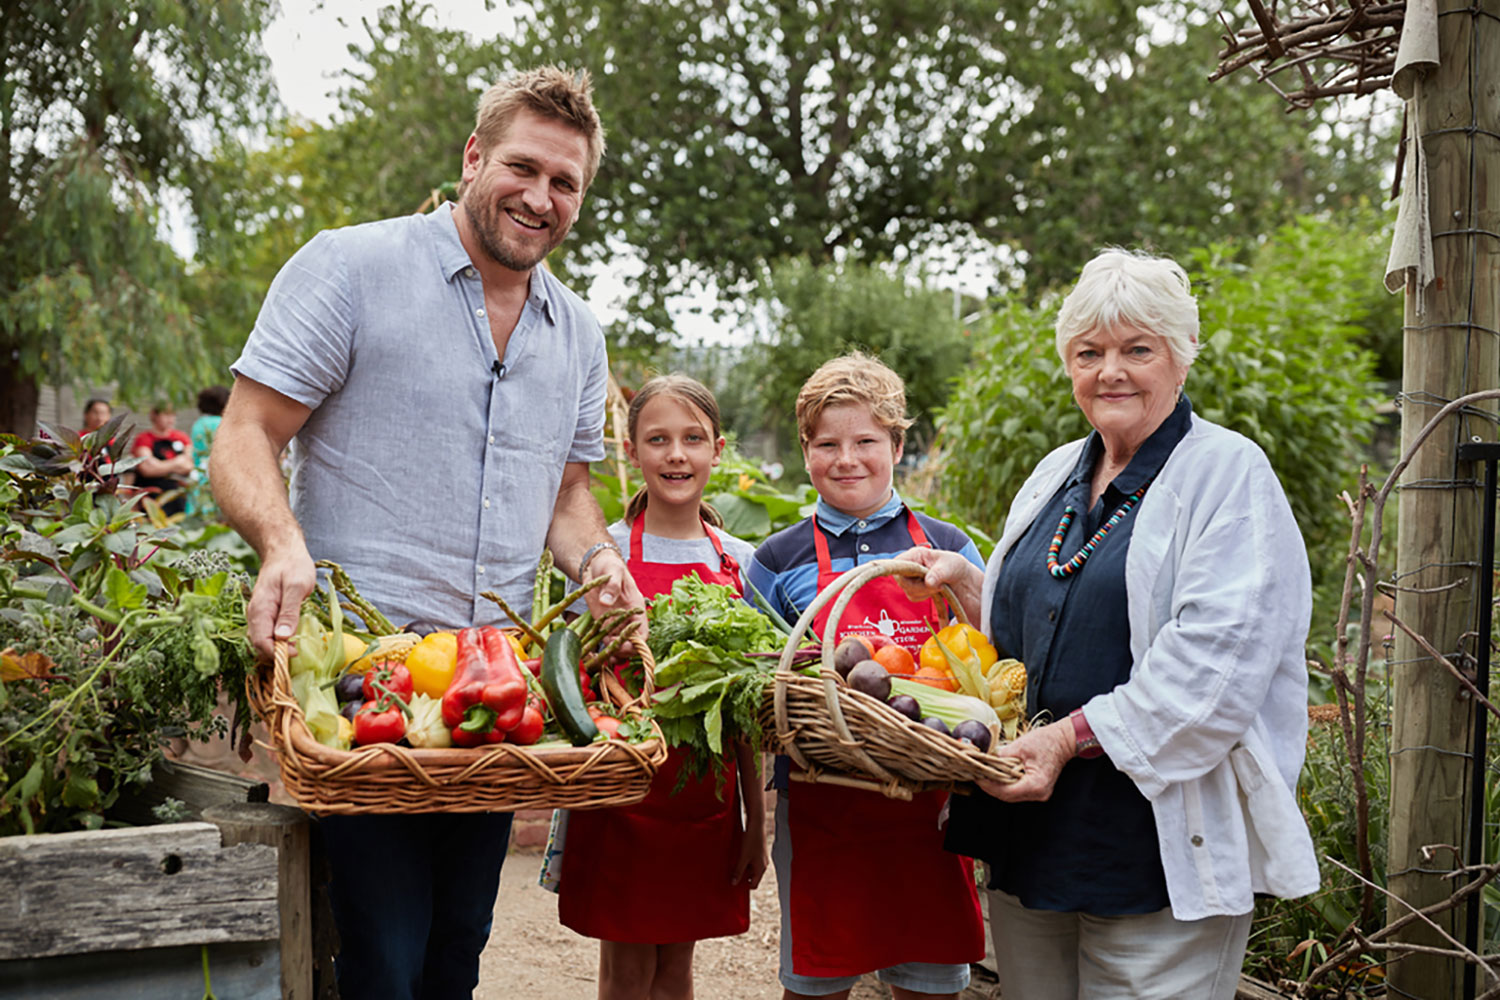 Stephanie Alexander and Curtis Stone with Alice and Josh at Collingwood College garden